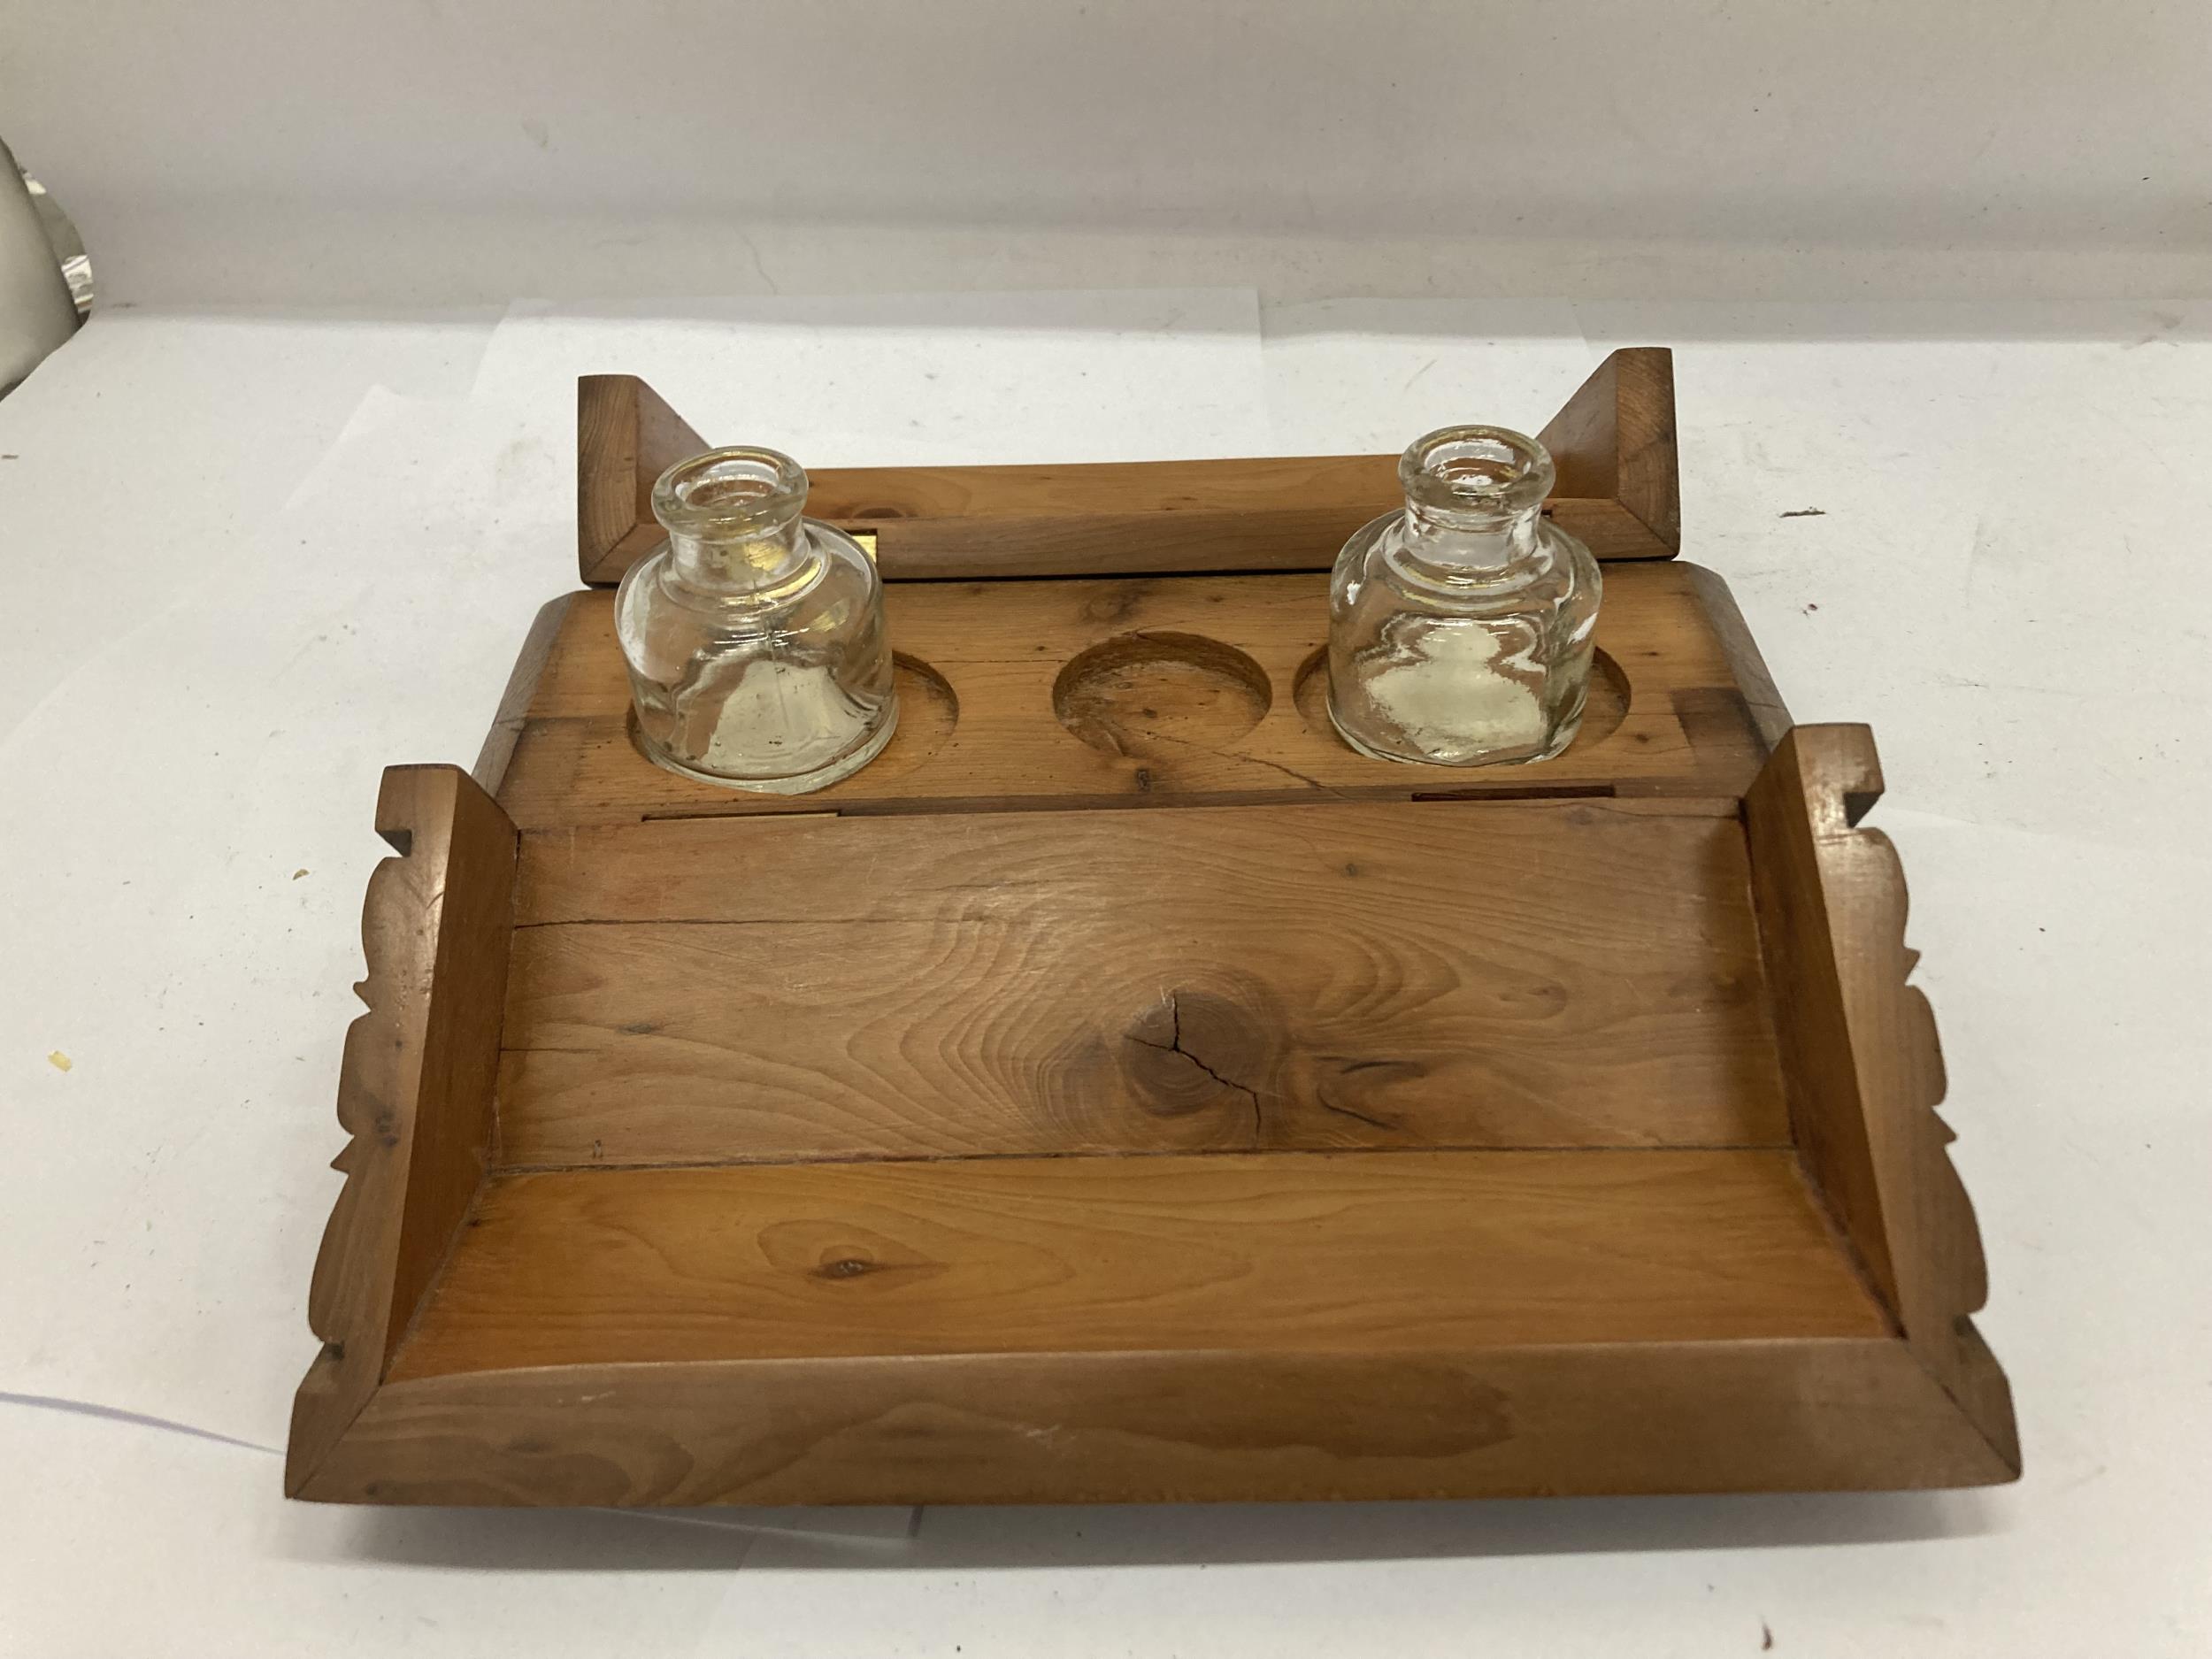 A CARVED WOODEN INKWELL WITH FALL DOWN SIDES - Image 2 of 3